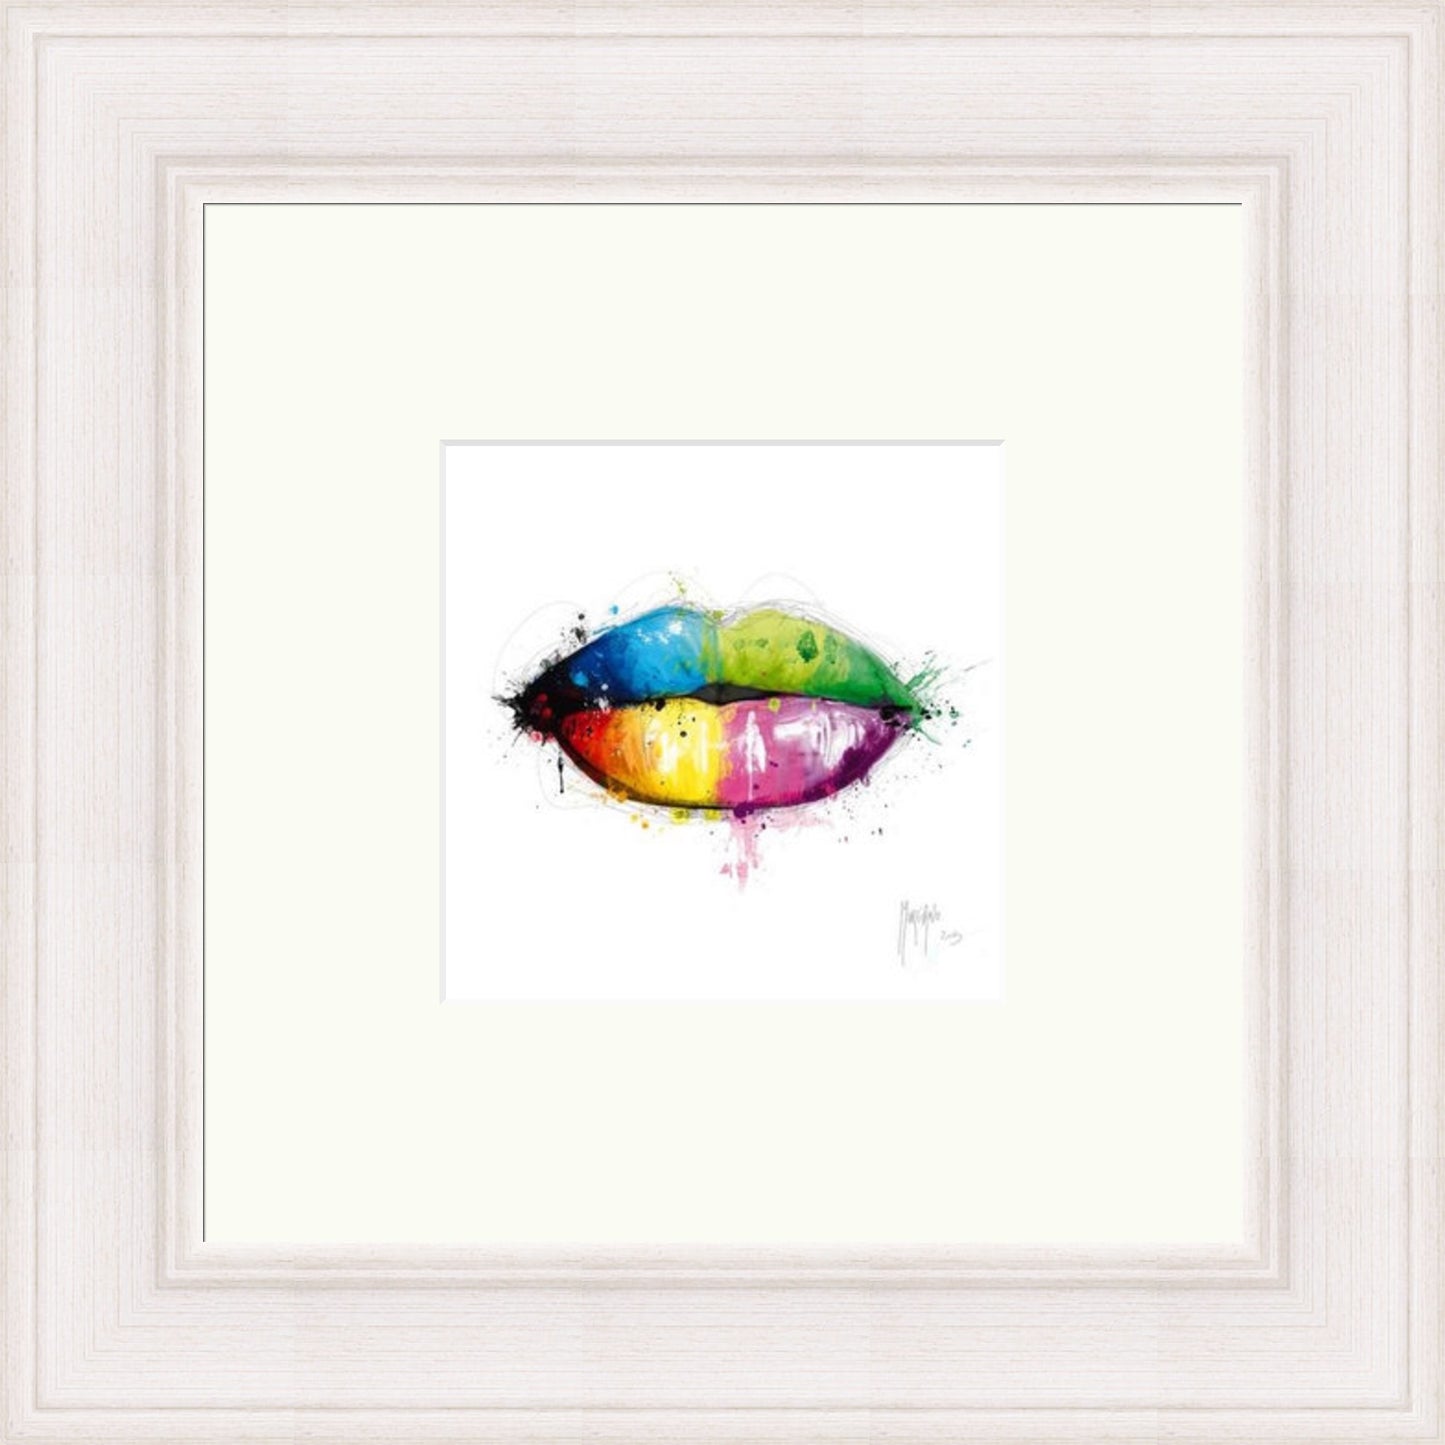 Candy Mouth by Patrice Murciano